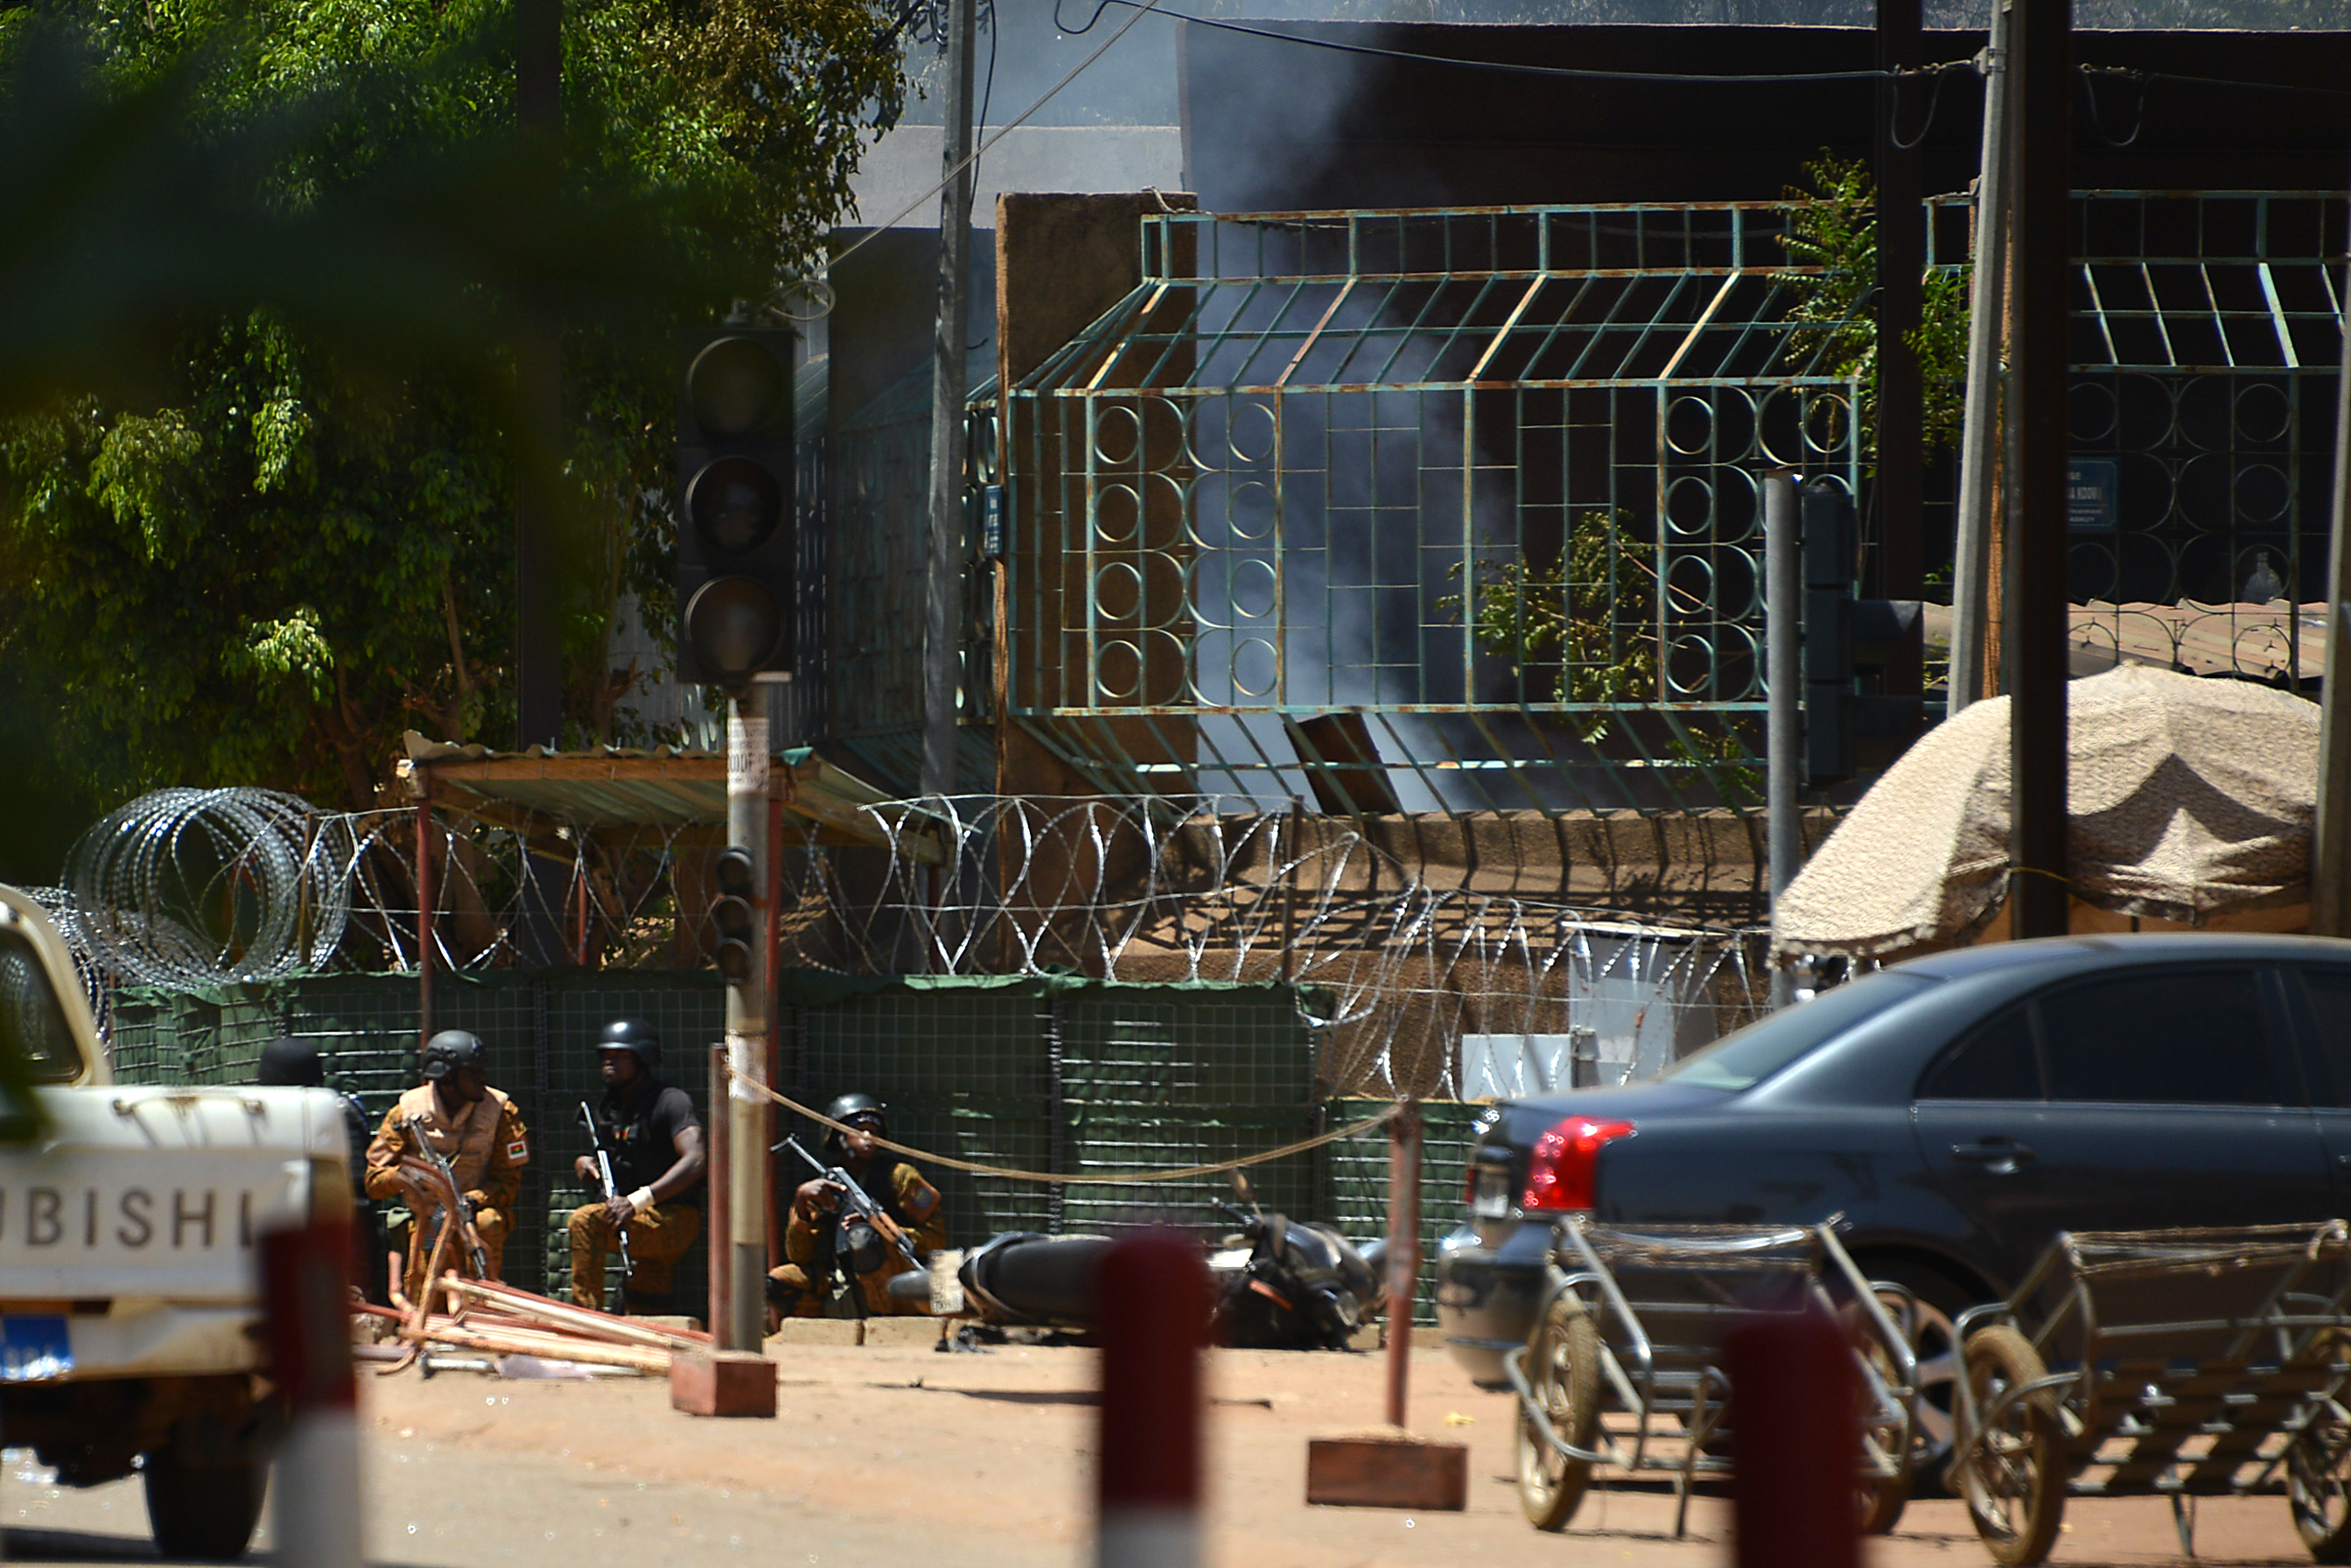 Security personnel take cover as smoke billows from The Institute Francais in Ouagadougou on March 2, 2018, as the capital of Burkina Faso came under multiple attacks targeting the French embassy, the French cultural centre and the country's military headquarters.
                      Witnesses said five armed men got out of a car and opened fire on passersby before heading towards the embassy, in the centre of the city. Other witnesses said there was an explosion near the headquarters of the Burkinabe armed forces and the French cultural centre, which are located about a kilometre (half a mile) from the site of the first attack.
                       / AFP PHOTO / Ahmed OUOBA        (Photo credit should read AHMED OUOBA/AFP/Getty Images) (AHMED OUOBA—AFP/Getty Images)